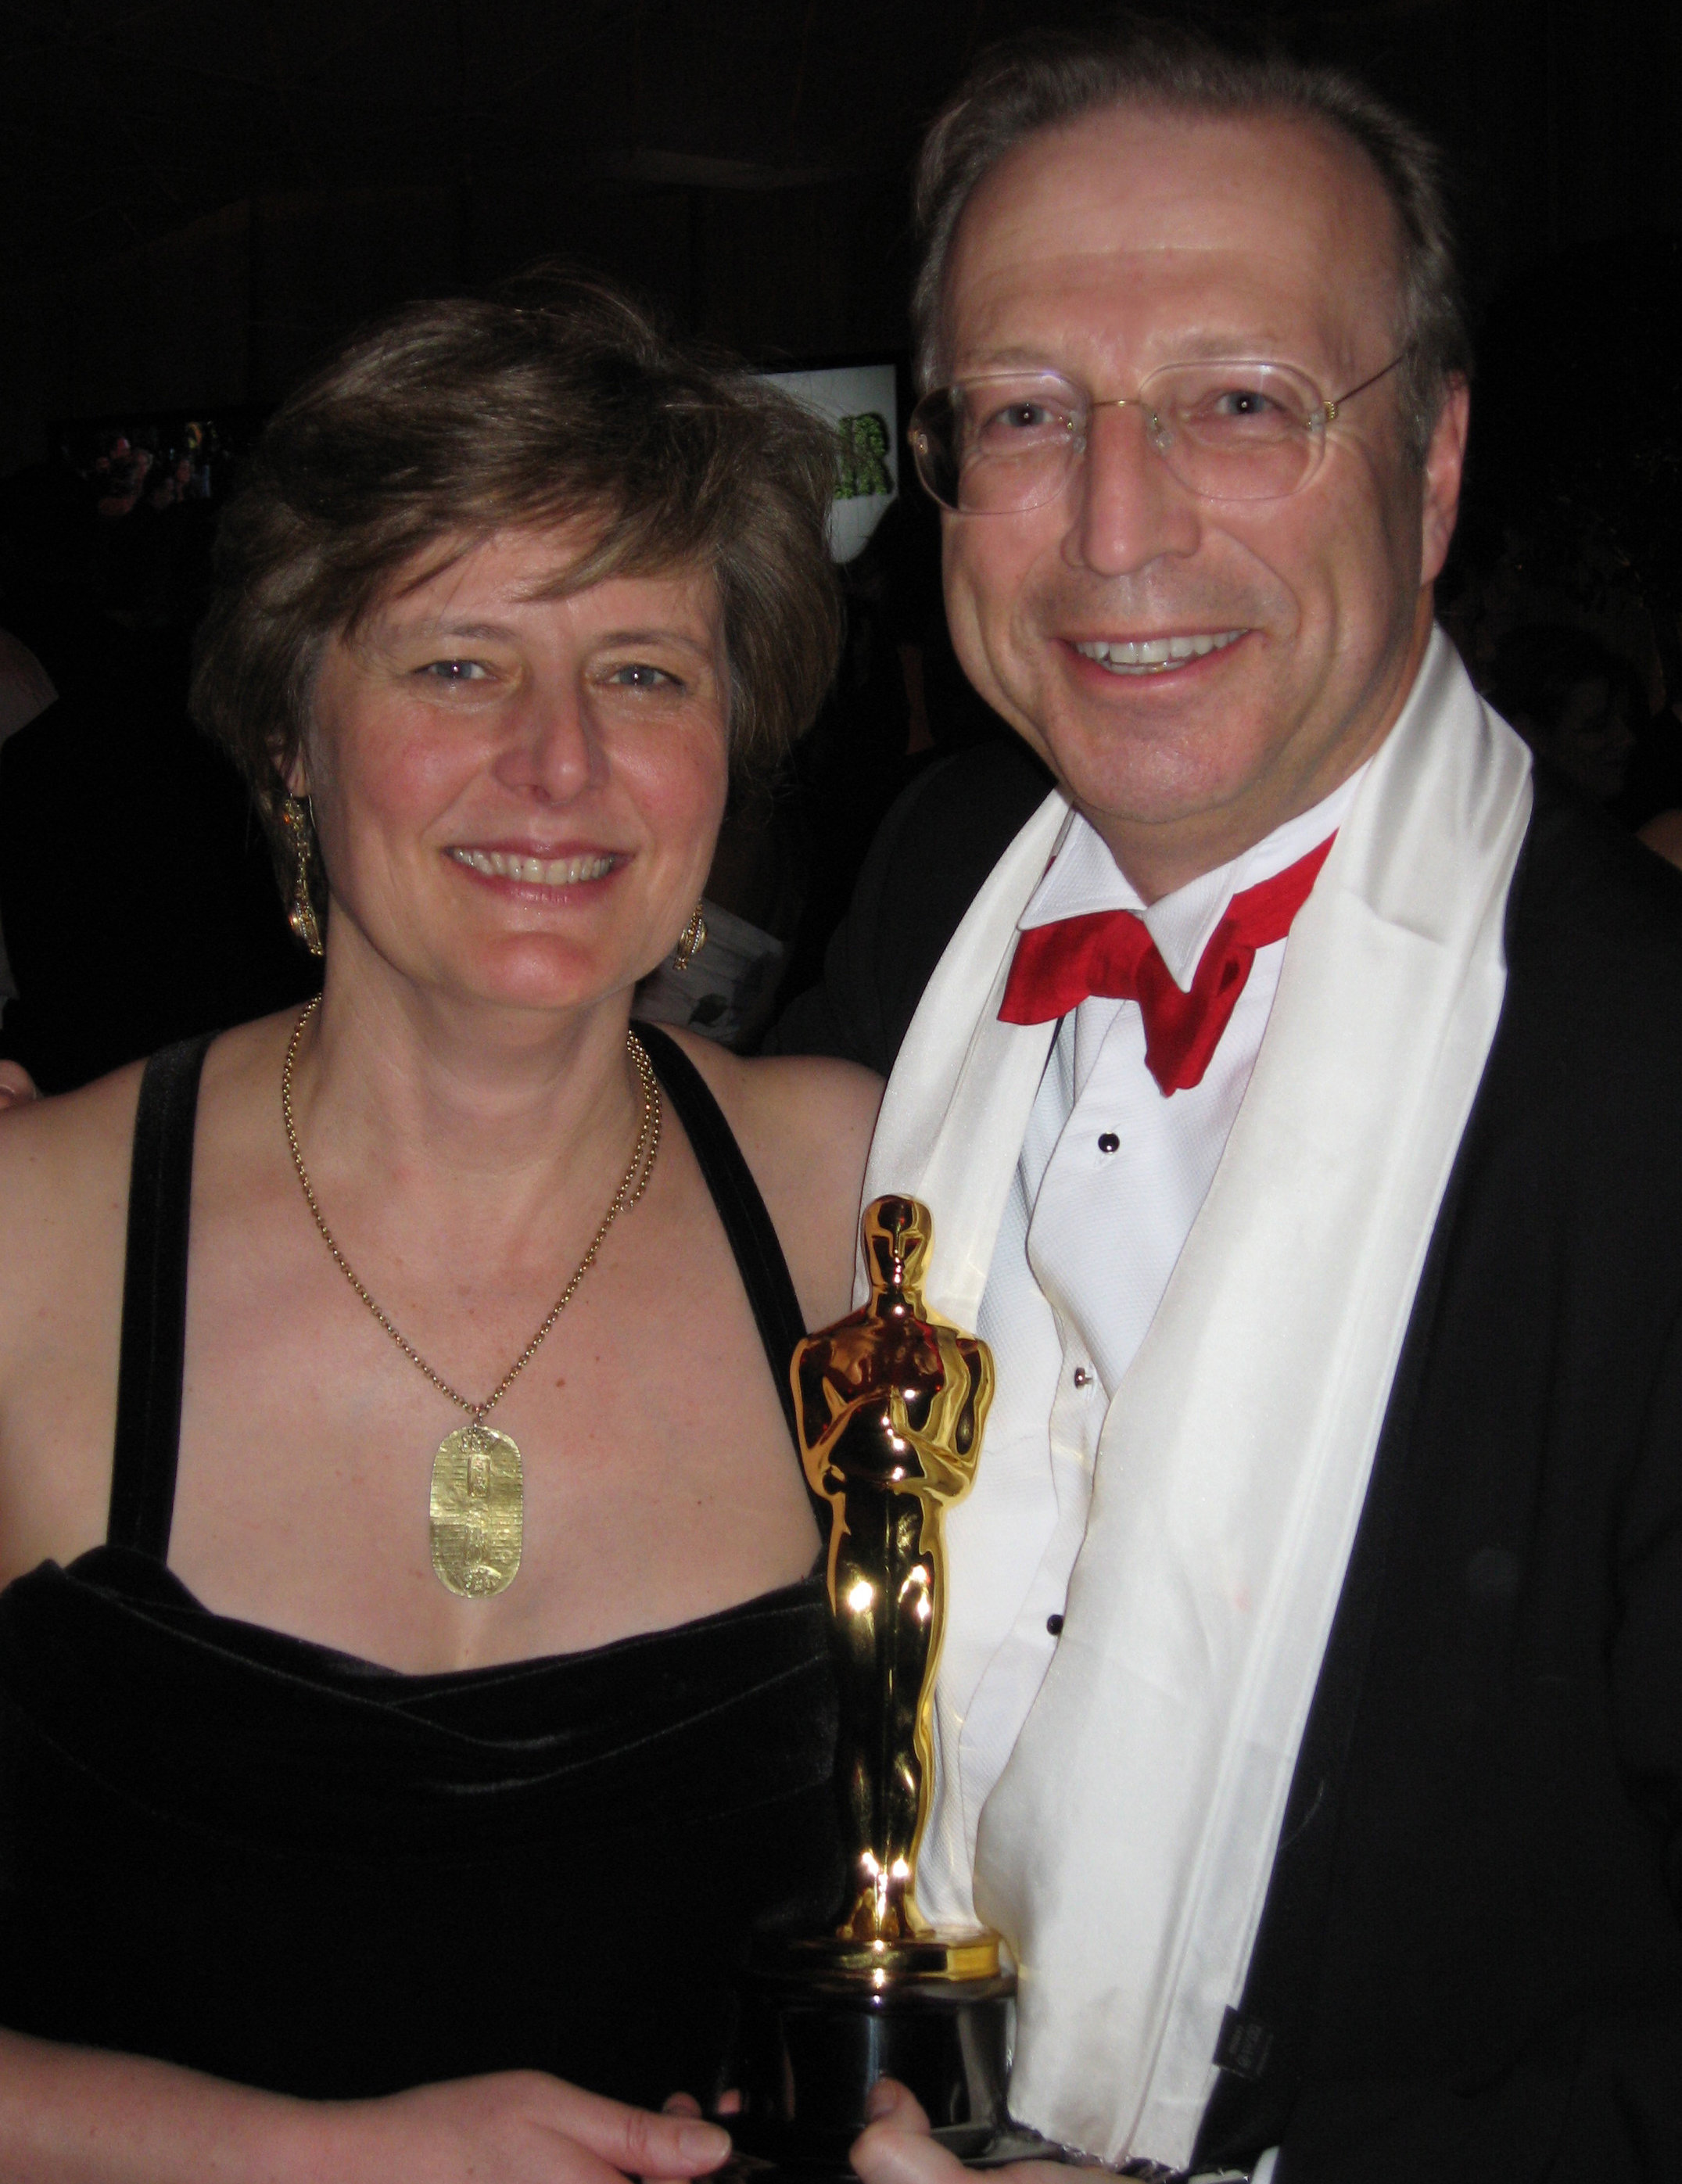 Peter & Henrietta Fudakowski with the Oscar for Best Foreign Language Film at the 78th Annual Academy Awards, Los Angeles